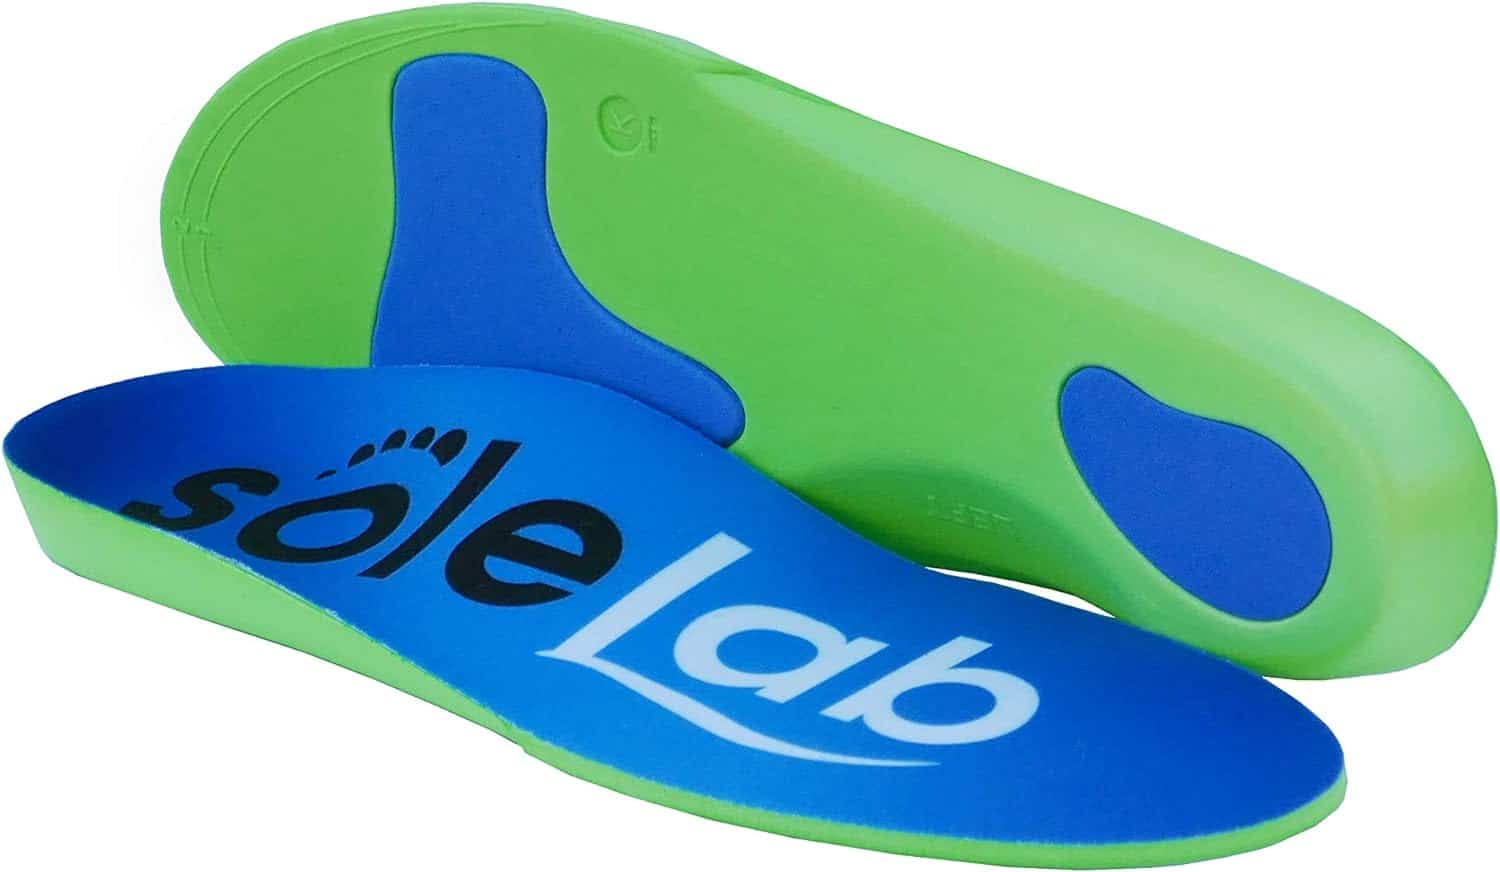 Unisex Children's Orthotic Insole Full Length Medical Grade Trimmable 20188